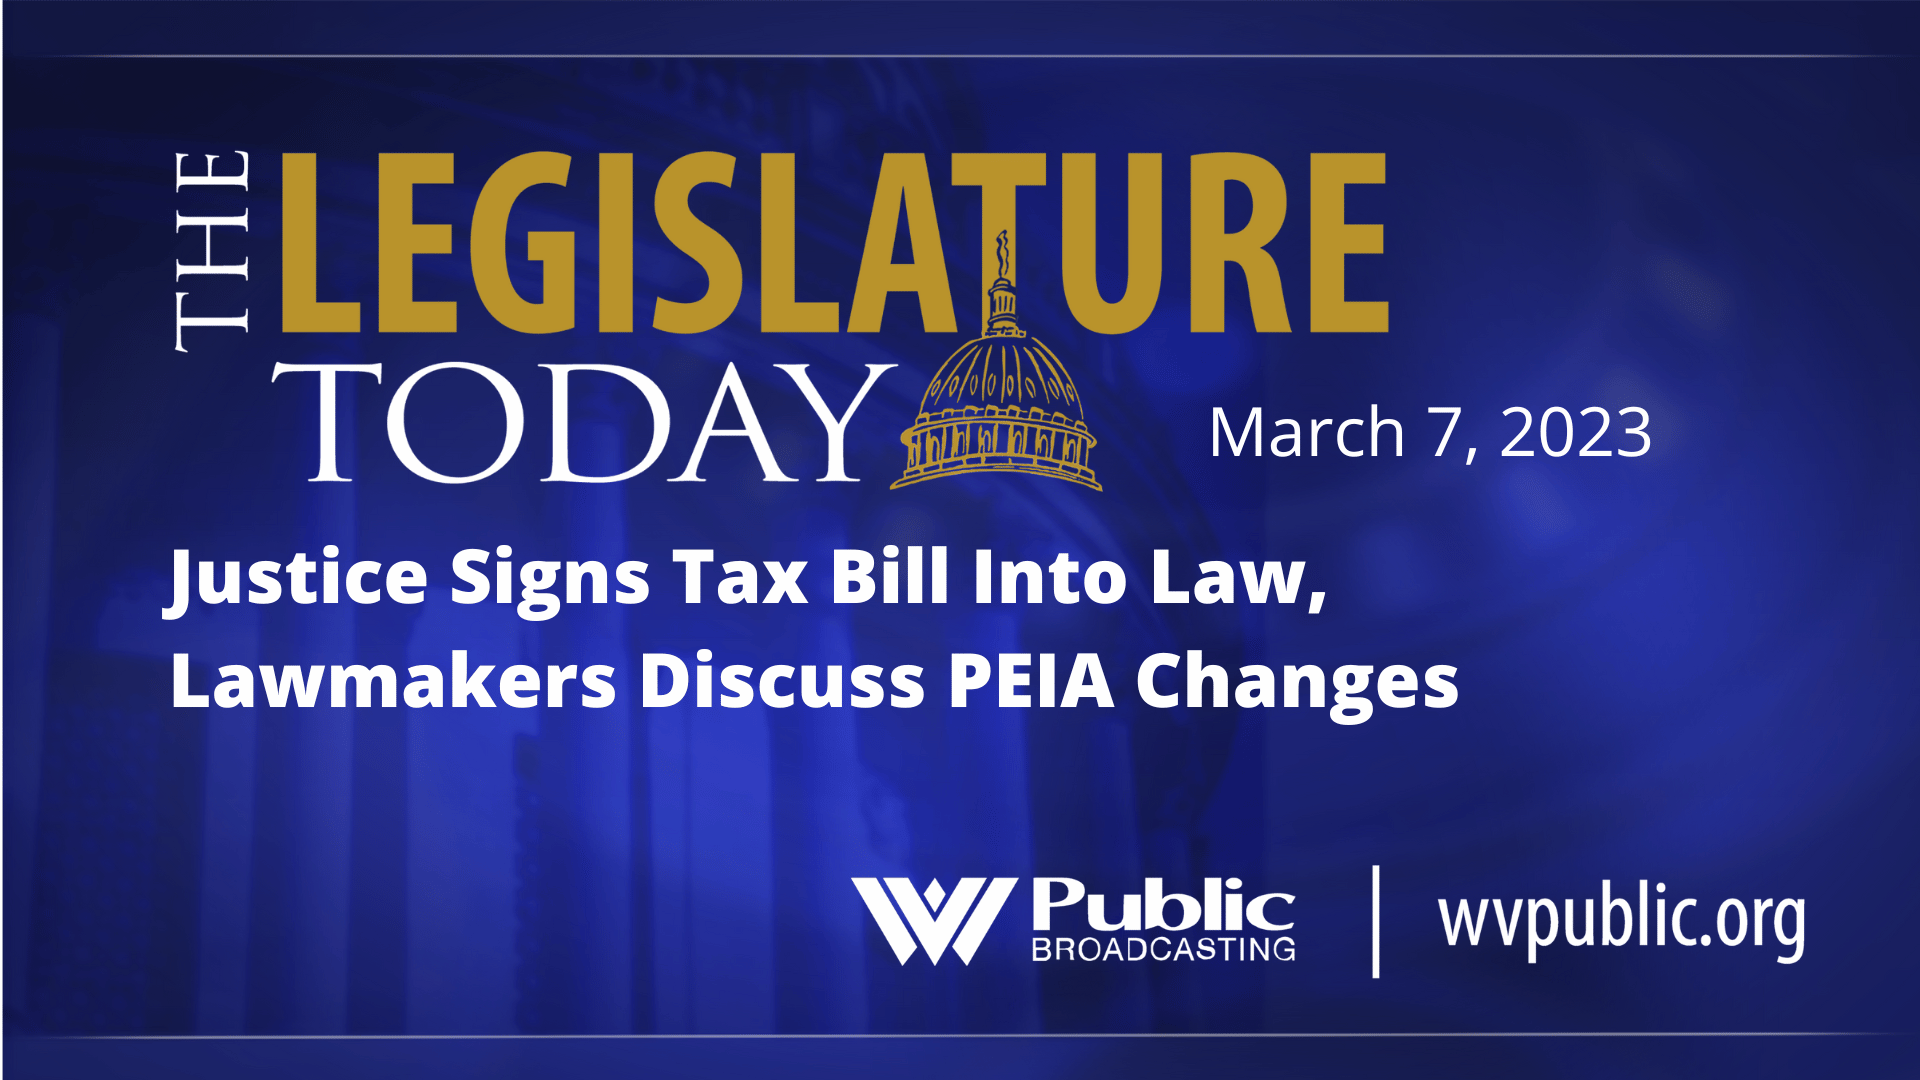 Justice Signs Tax Bill Into Law, Lawmakers Discuss PEIA Changes